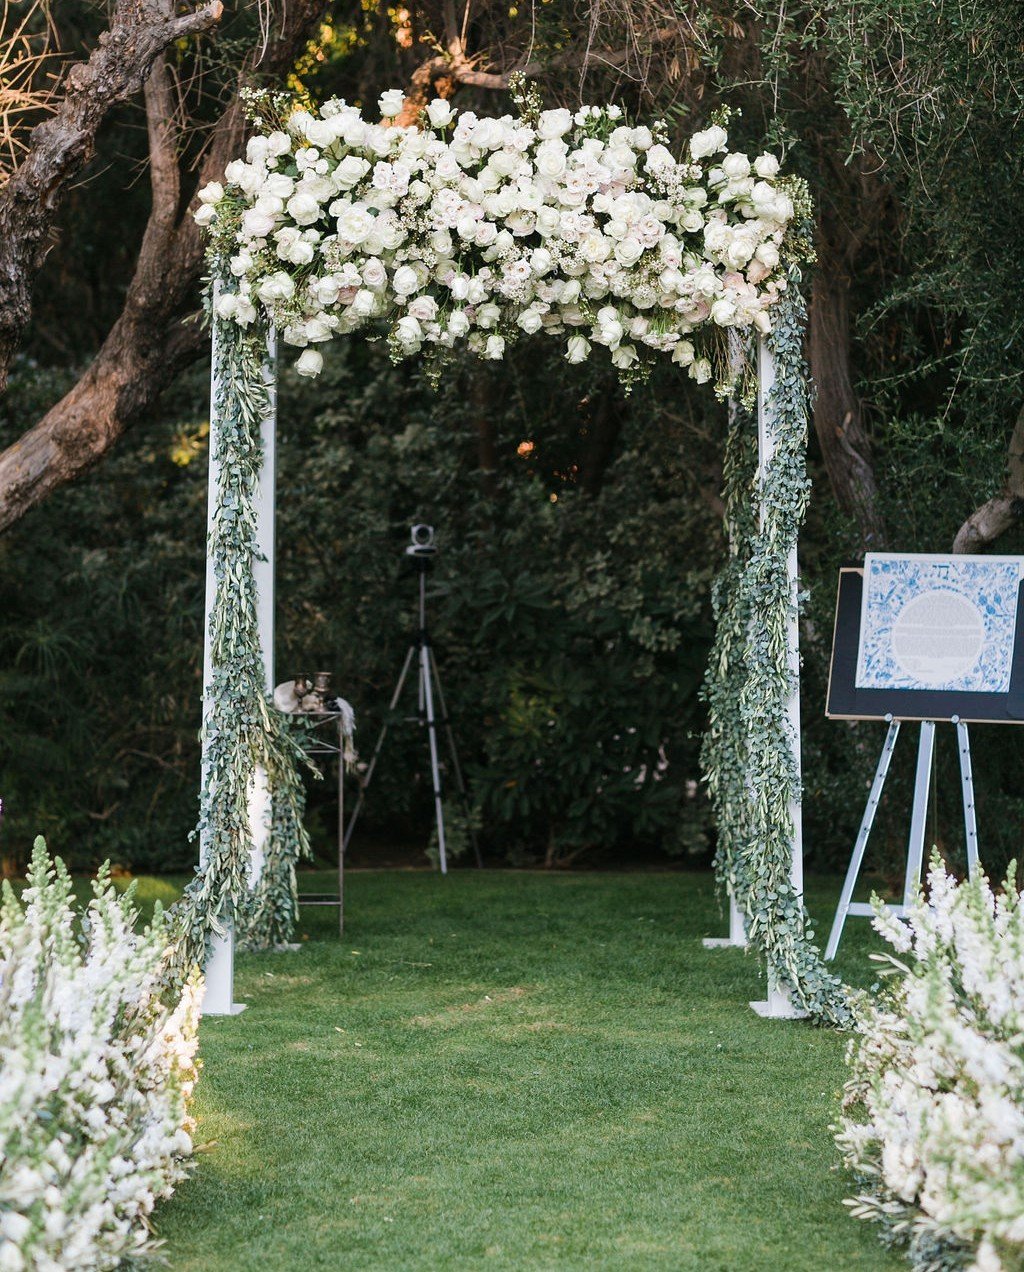 This stunning ceremony floral consists of garden roses, spray roses, wax flower, olive branches and eucalyptus.
...
#artisaninspiration #palmspringswedding #artisanevents #artisaneventfloraldecor #chuppah #weddingfloral